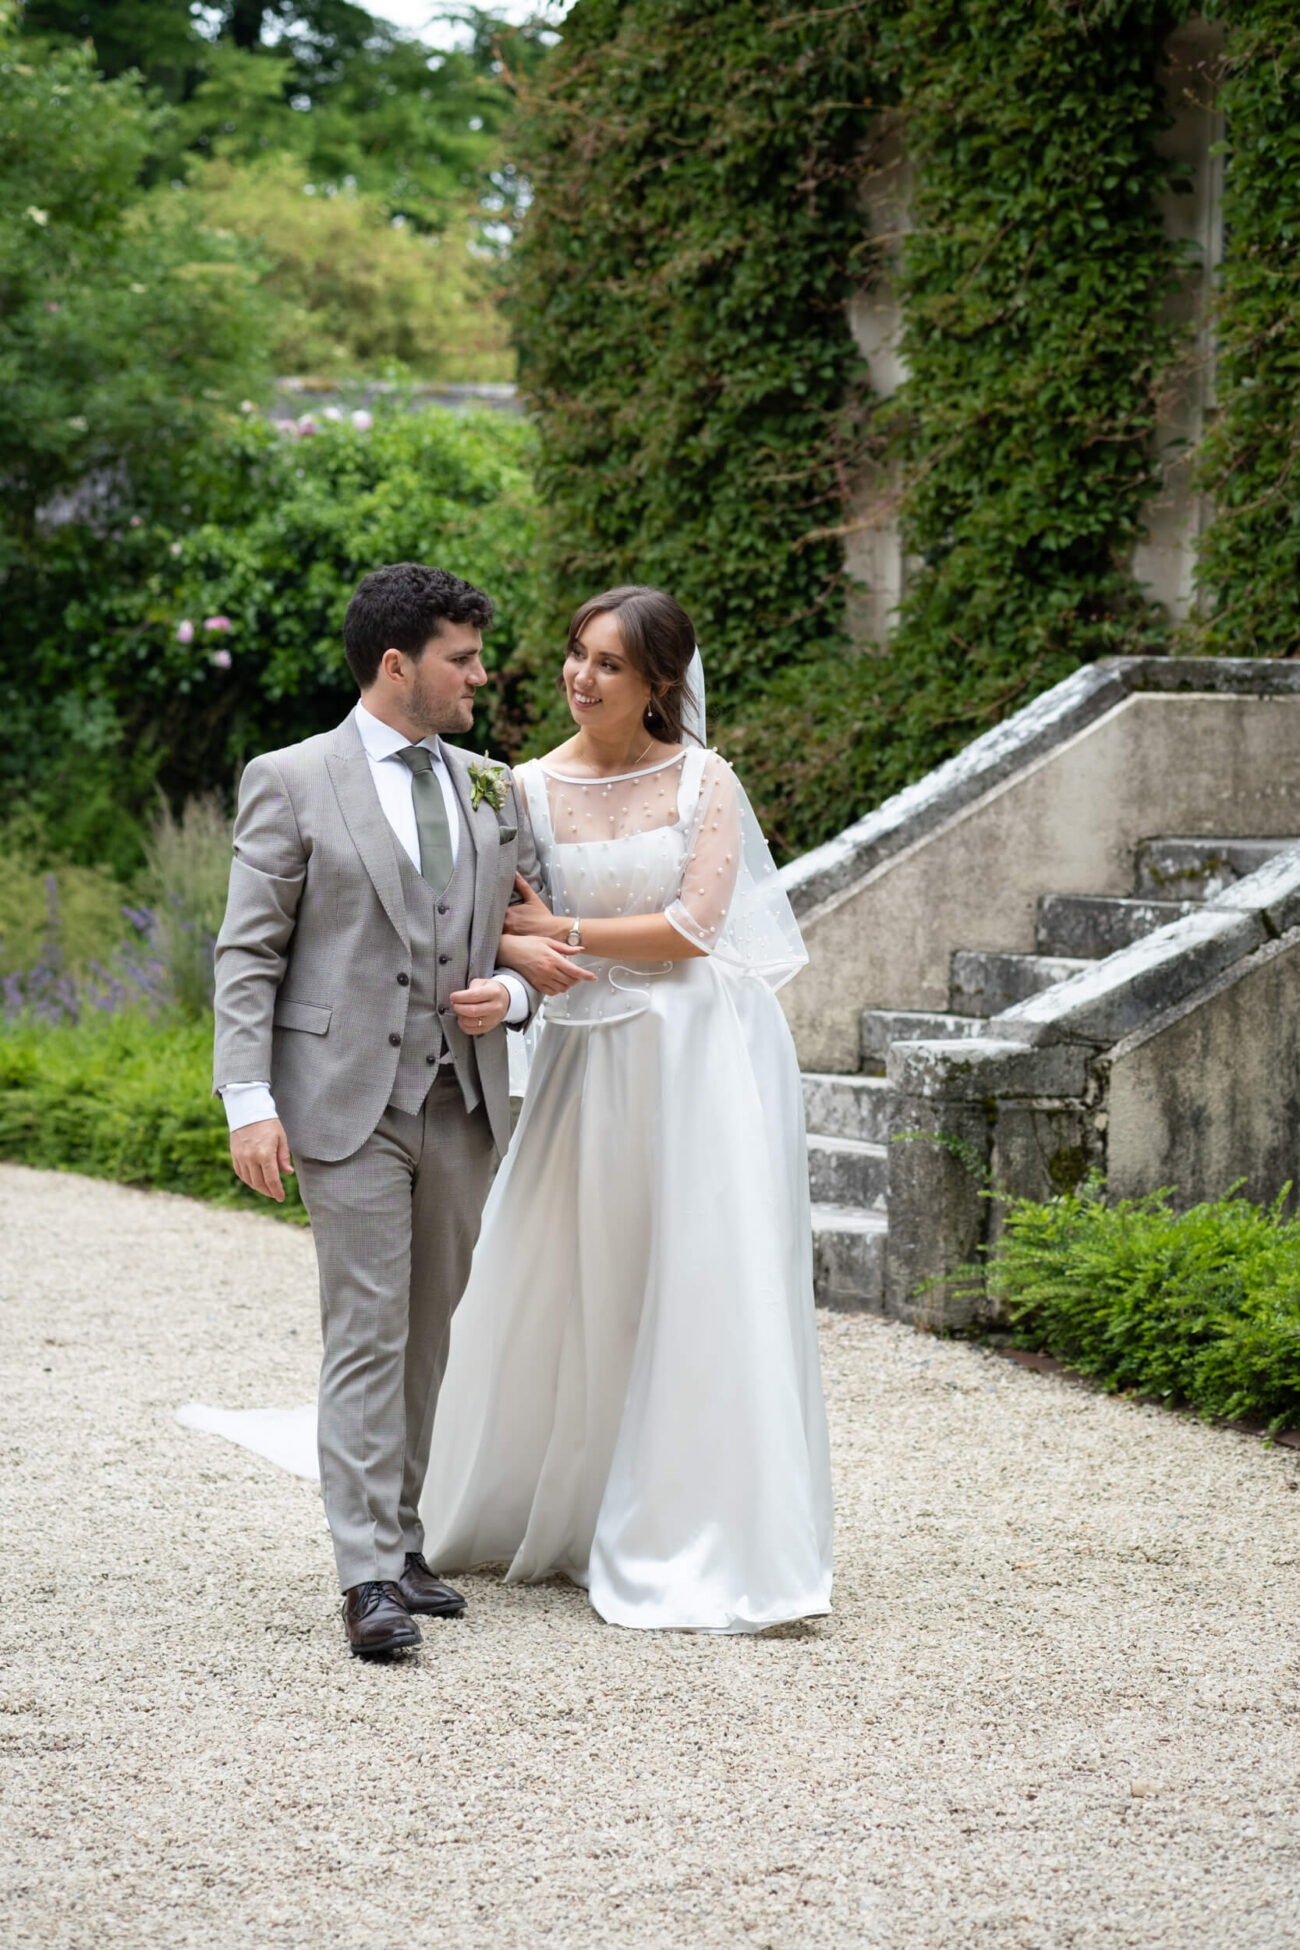 Bride and groom walking arm in arm chatting at the front of the house at Ballintubbert Gardens and House